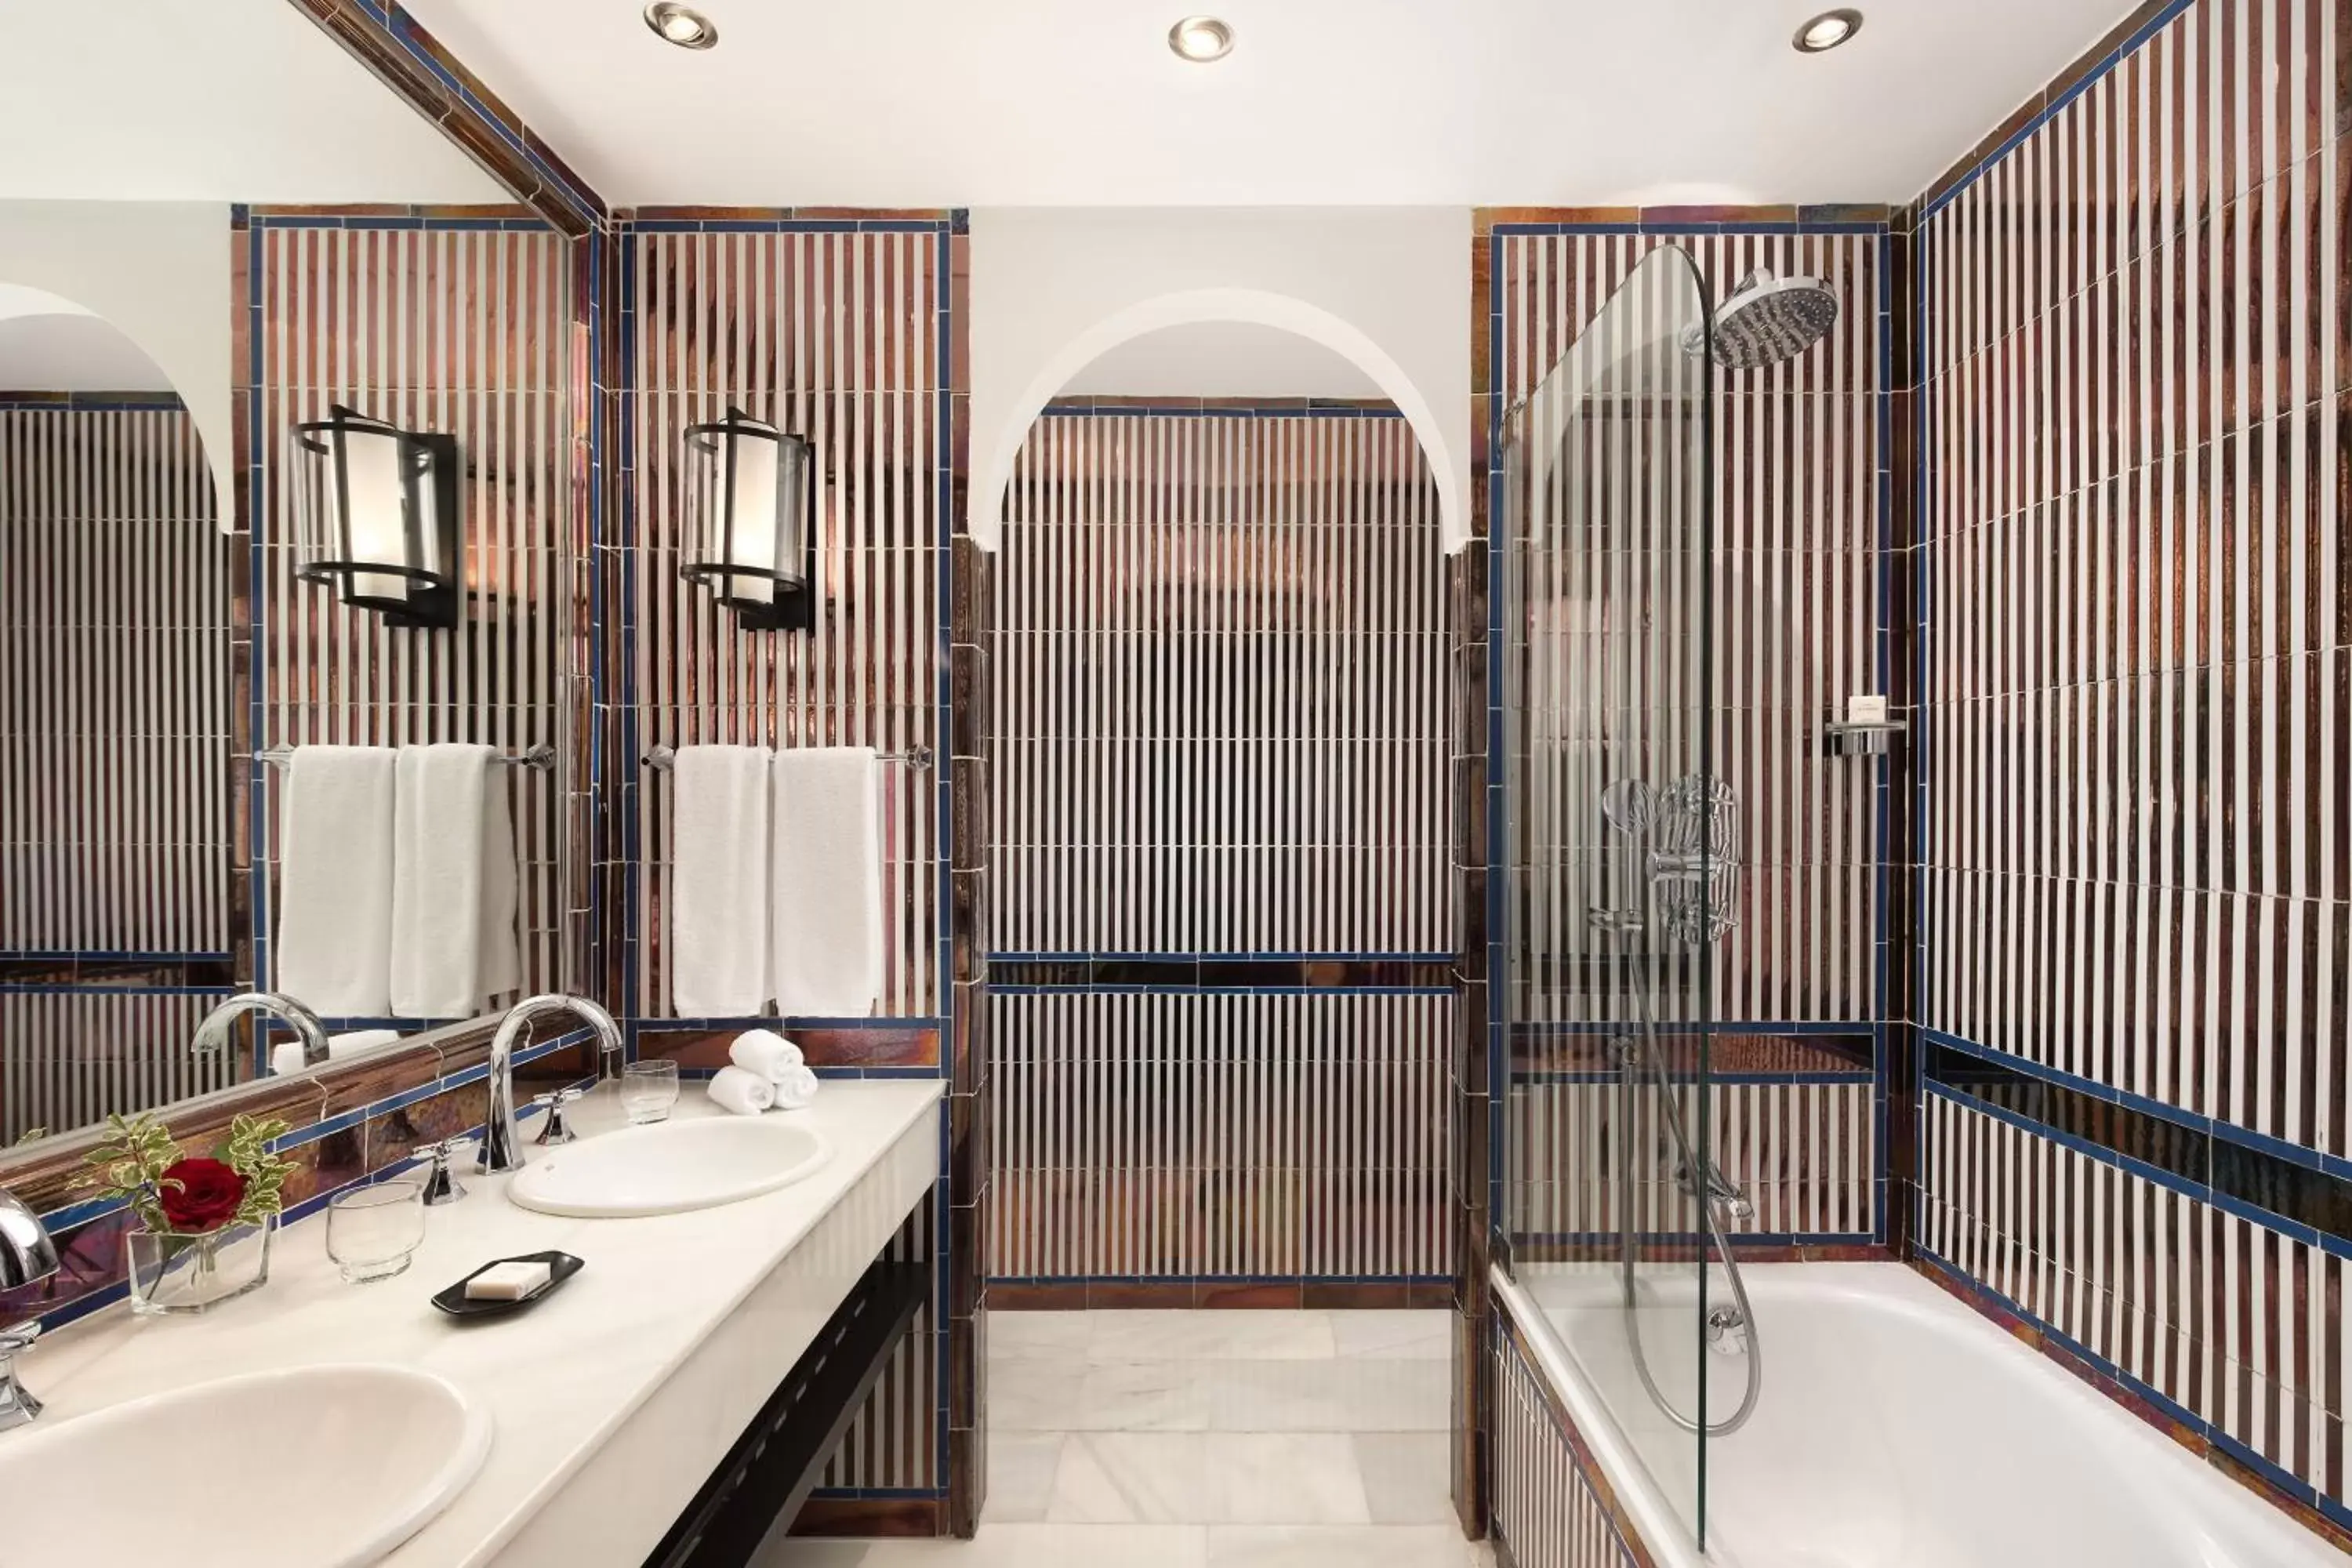 Bathroom in Hotel Alfonso XIII, a Luxury Collection Hotel, Seville